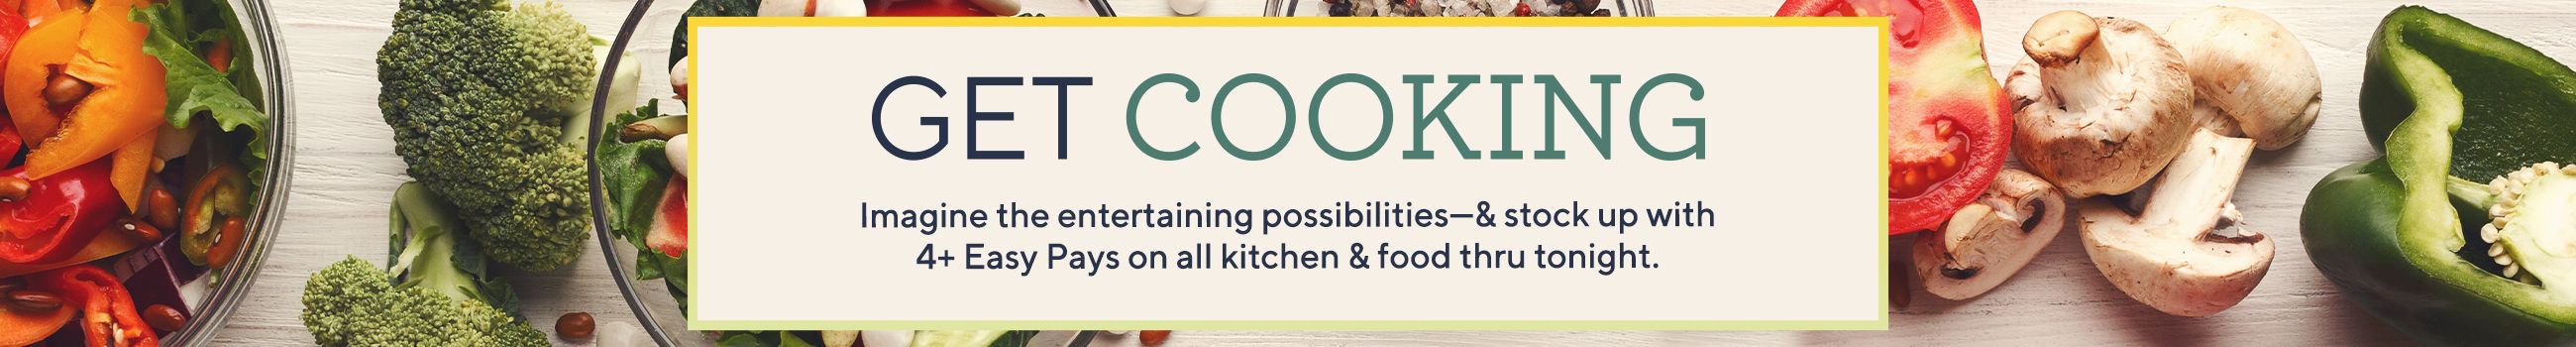 Get Cooking. Imagine the entertaining possibilities—& stock up with 4 or more Easy Pays on all kitchen & food thru tonight. 